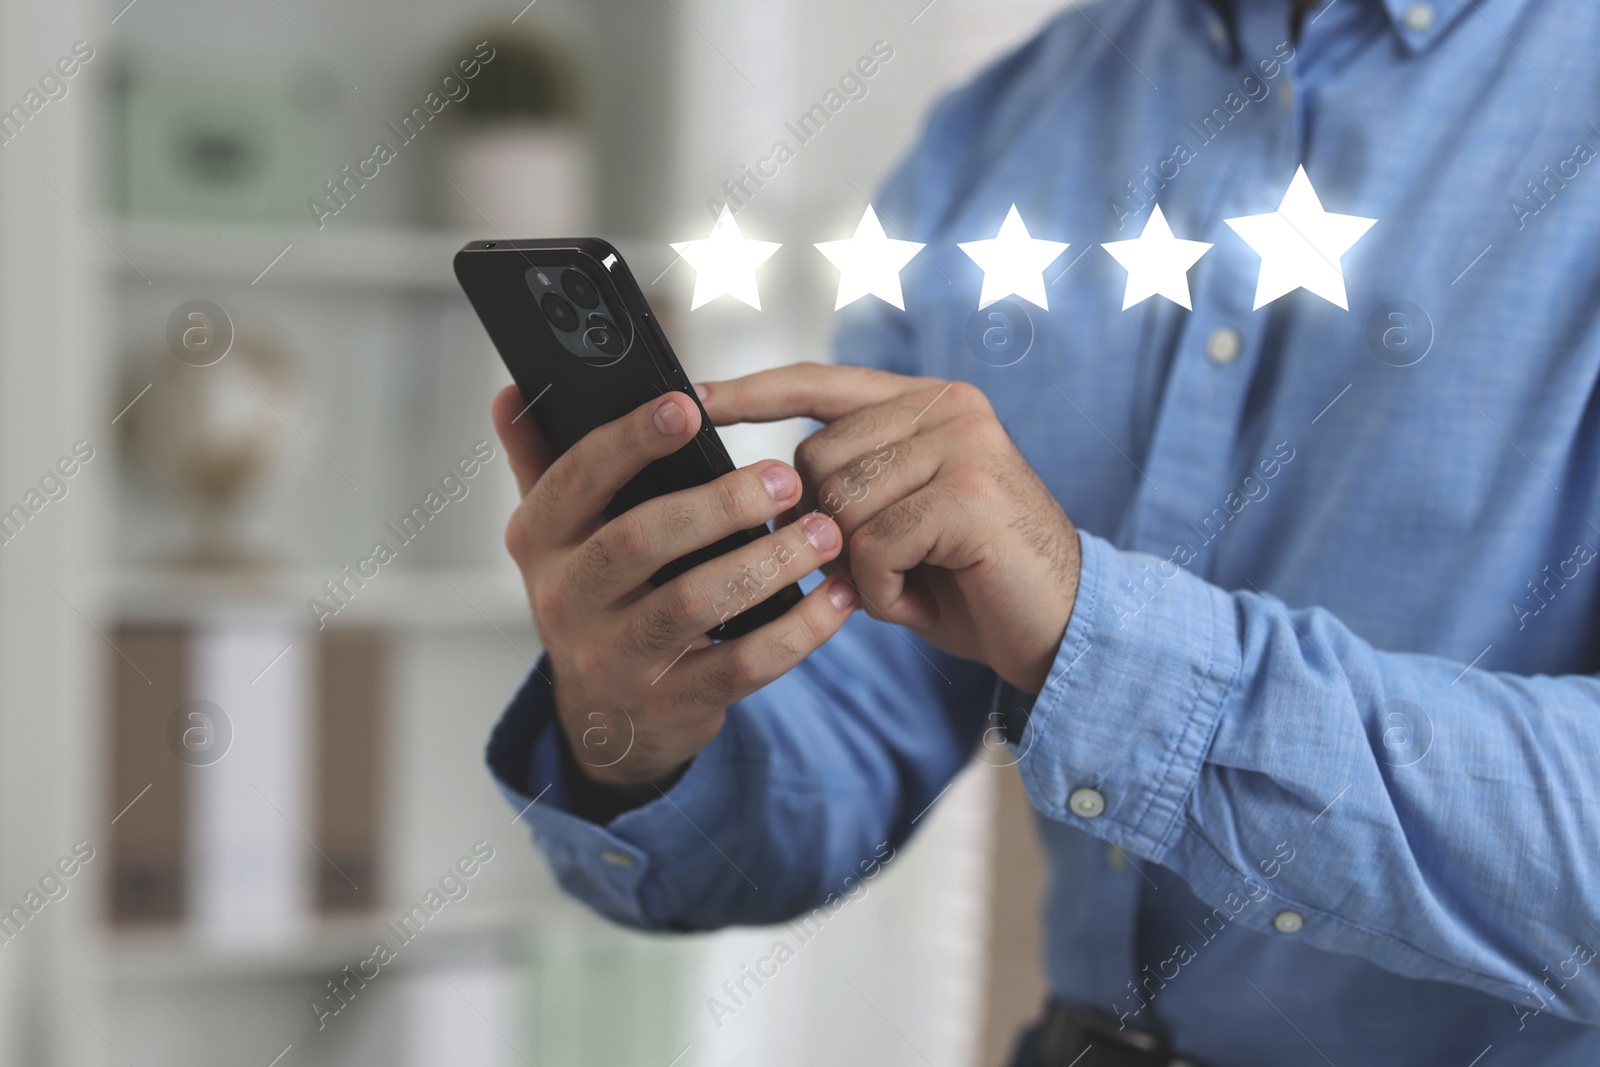 Image of Man leaving service feedback with smartphone at home, closeup. Stars over device